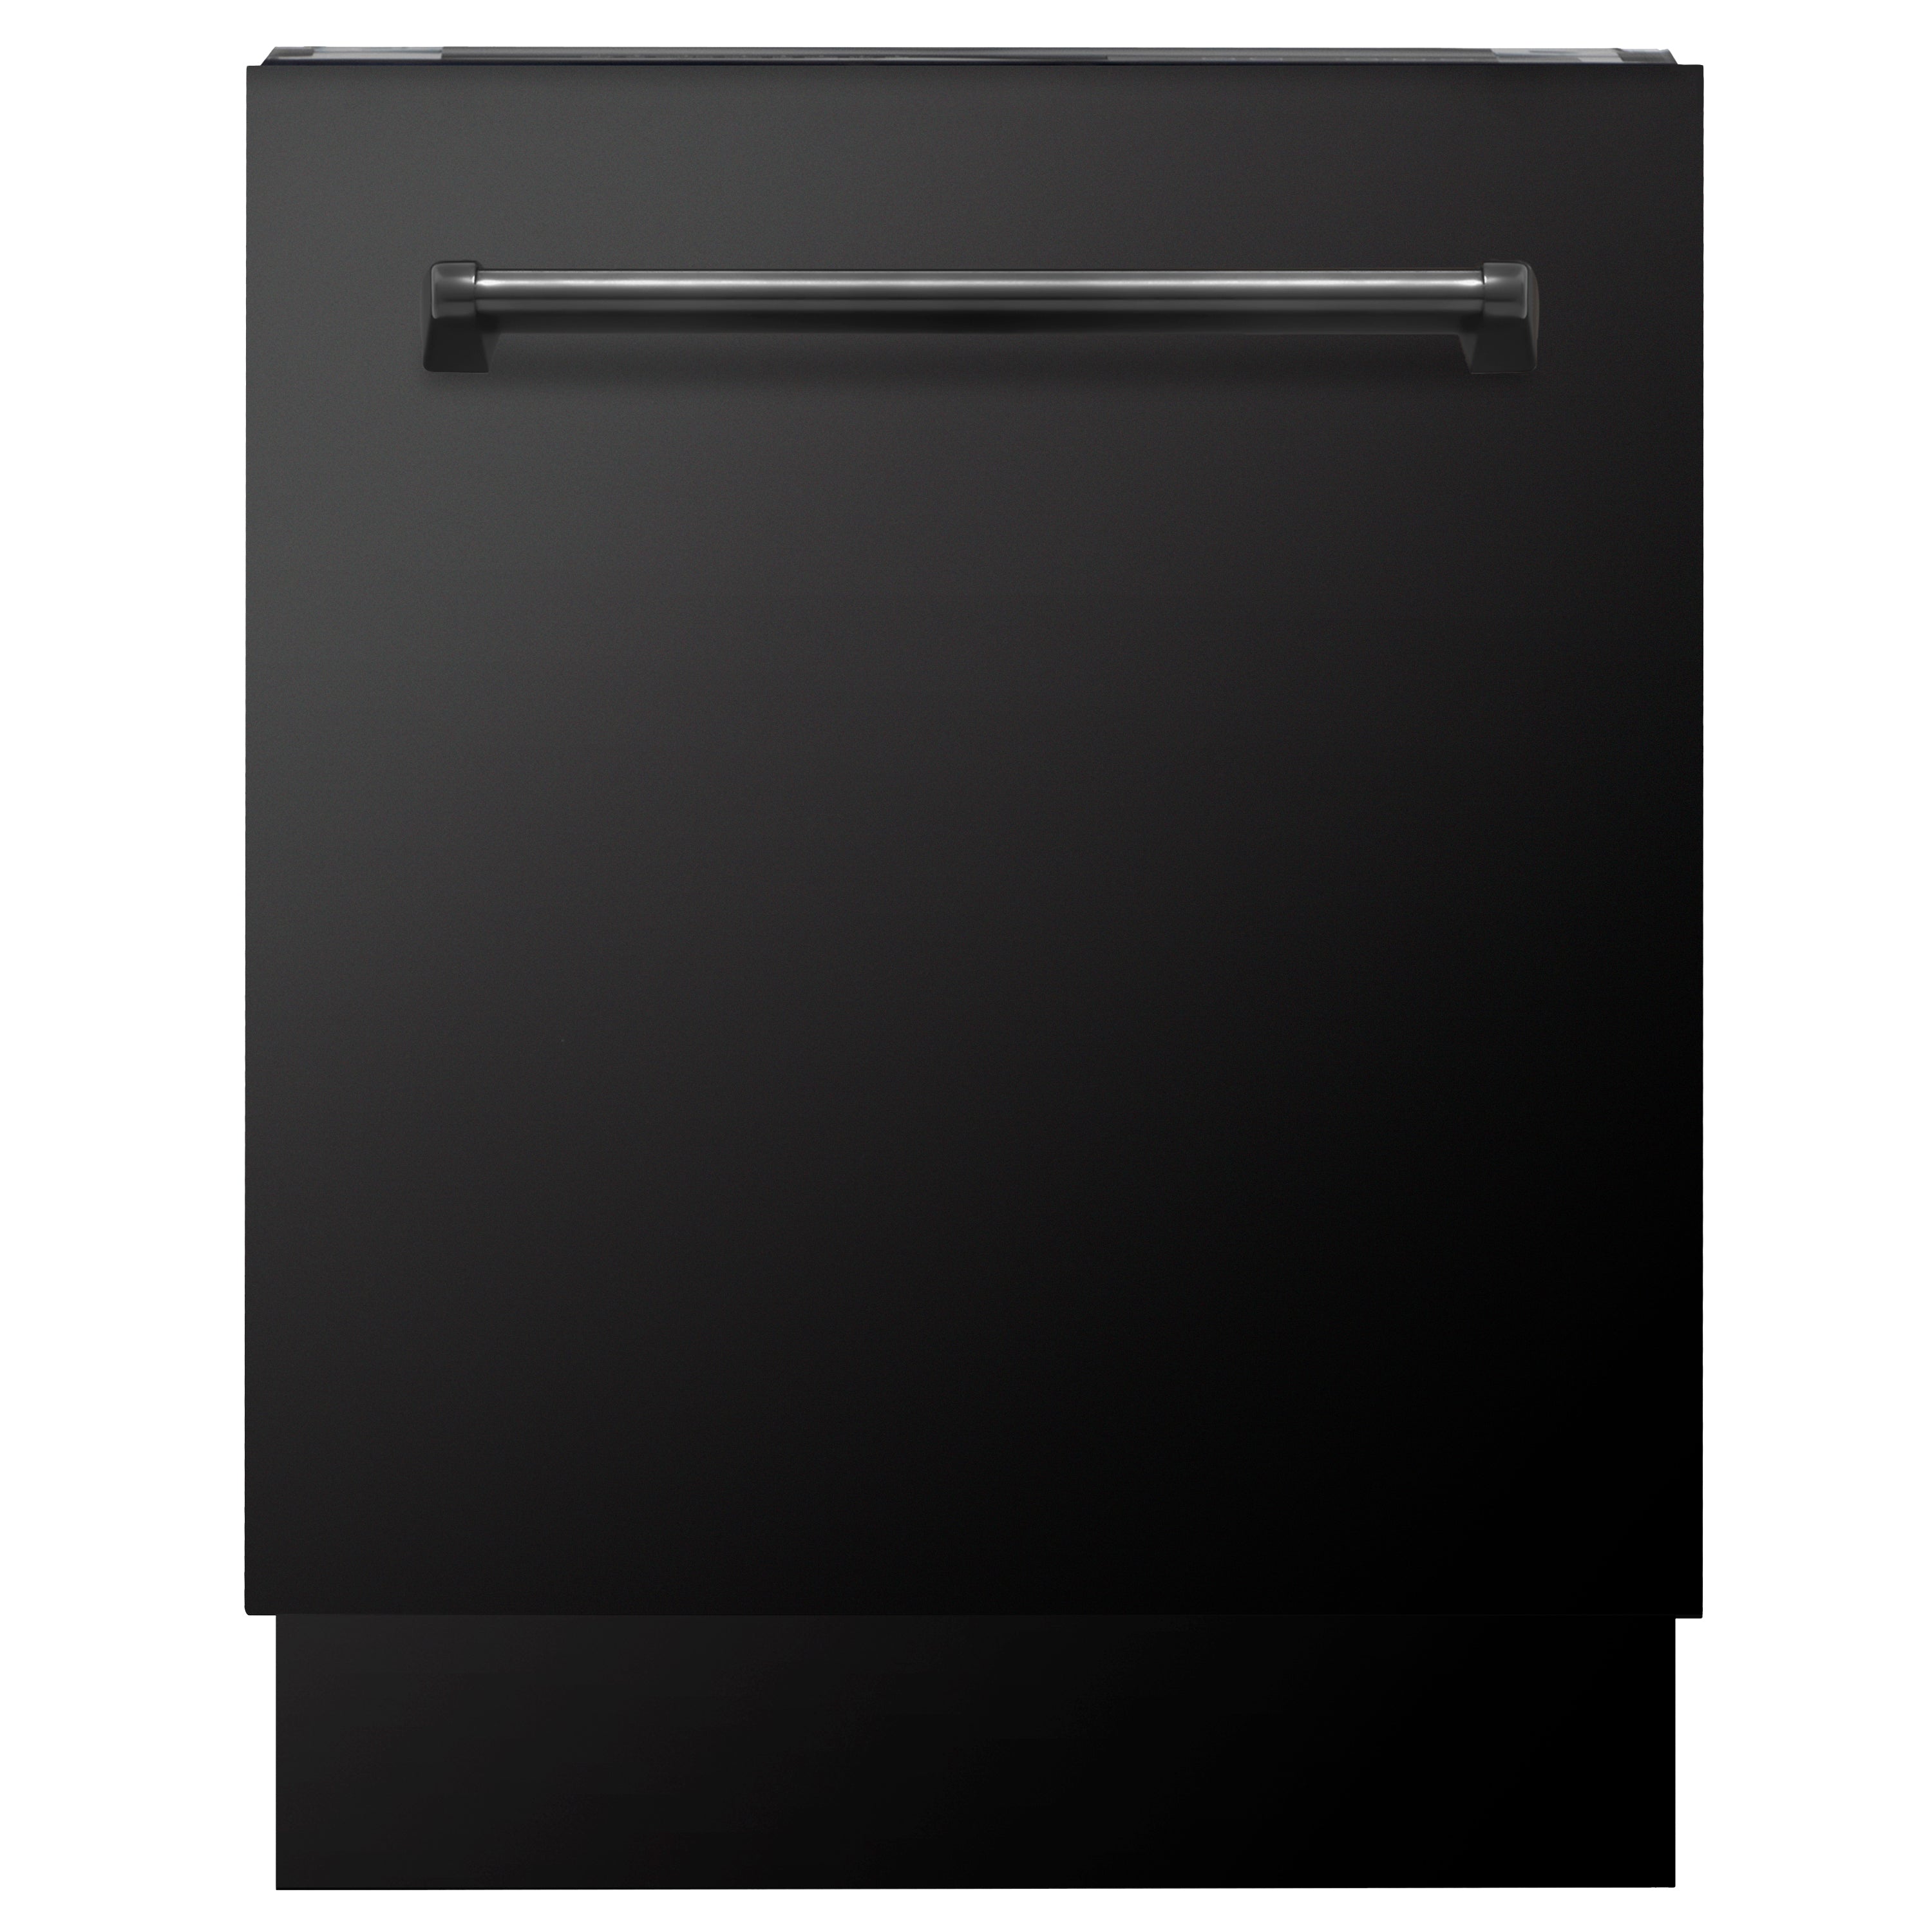 ZLINE 24" Tallac Series 3rd Rack Tall Tub Dishwasher in Black Stainless Steel with Stainless Steel Tub, 51dBa (DWV-BS-24)